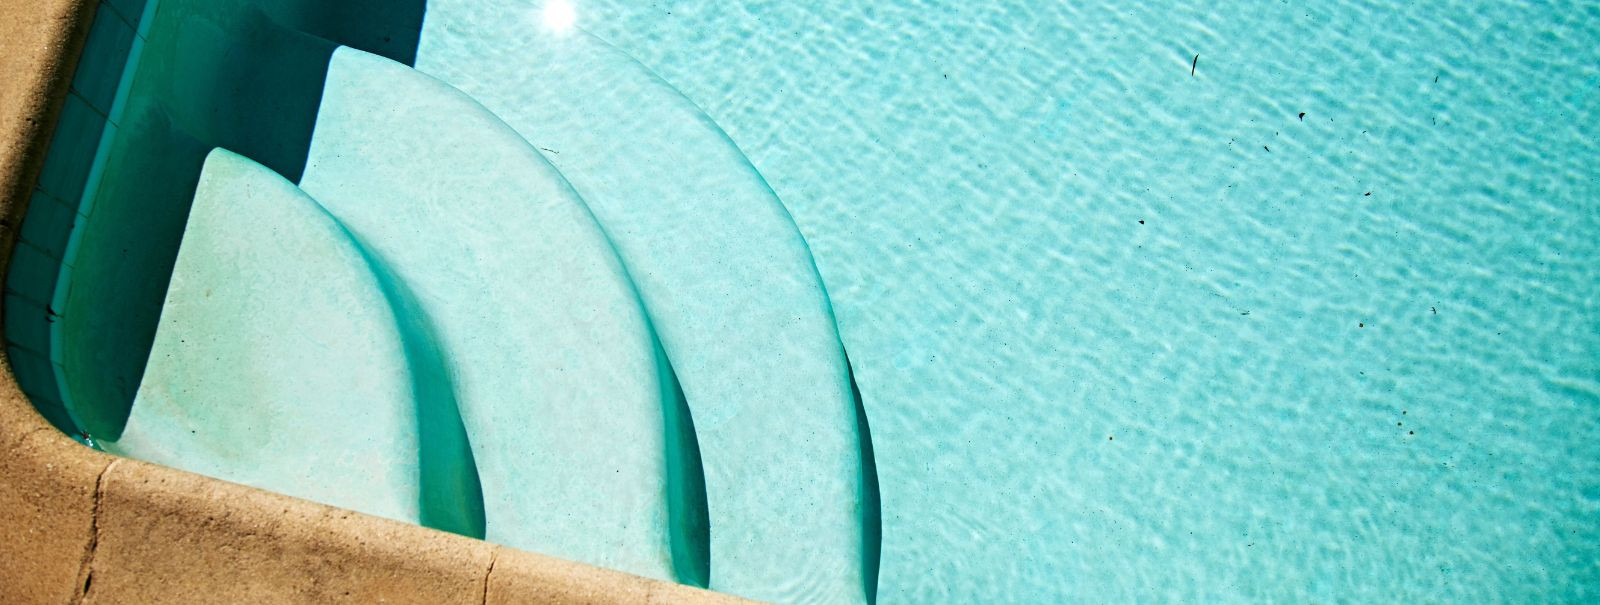 At HELAR CRYPTOGRAPHY OÜ, we believe that your home should be a sanctuary of comfort and luxury. With our expertise in pool renovation and construction, we turn